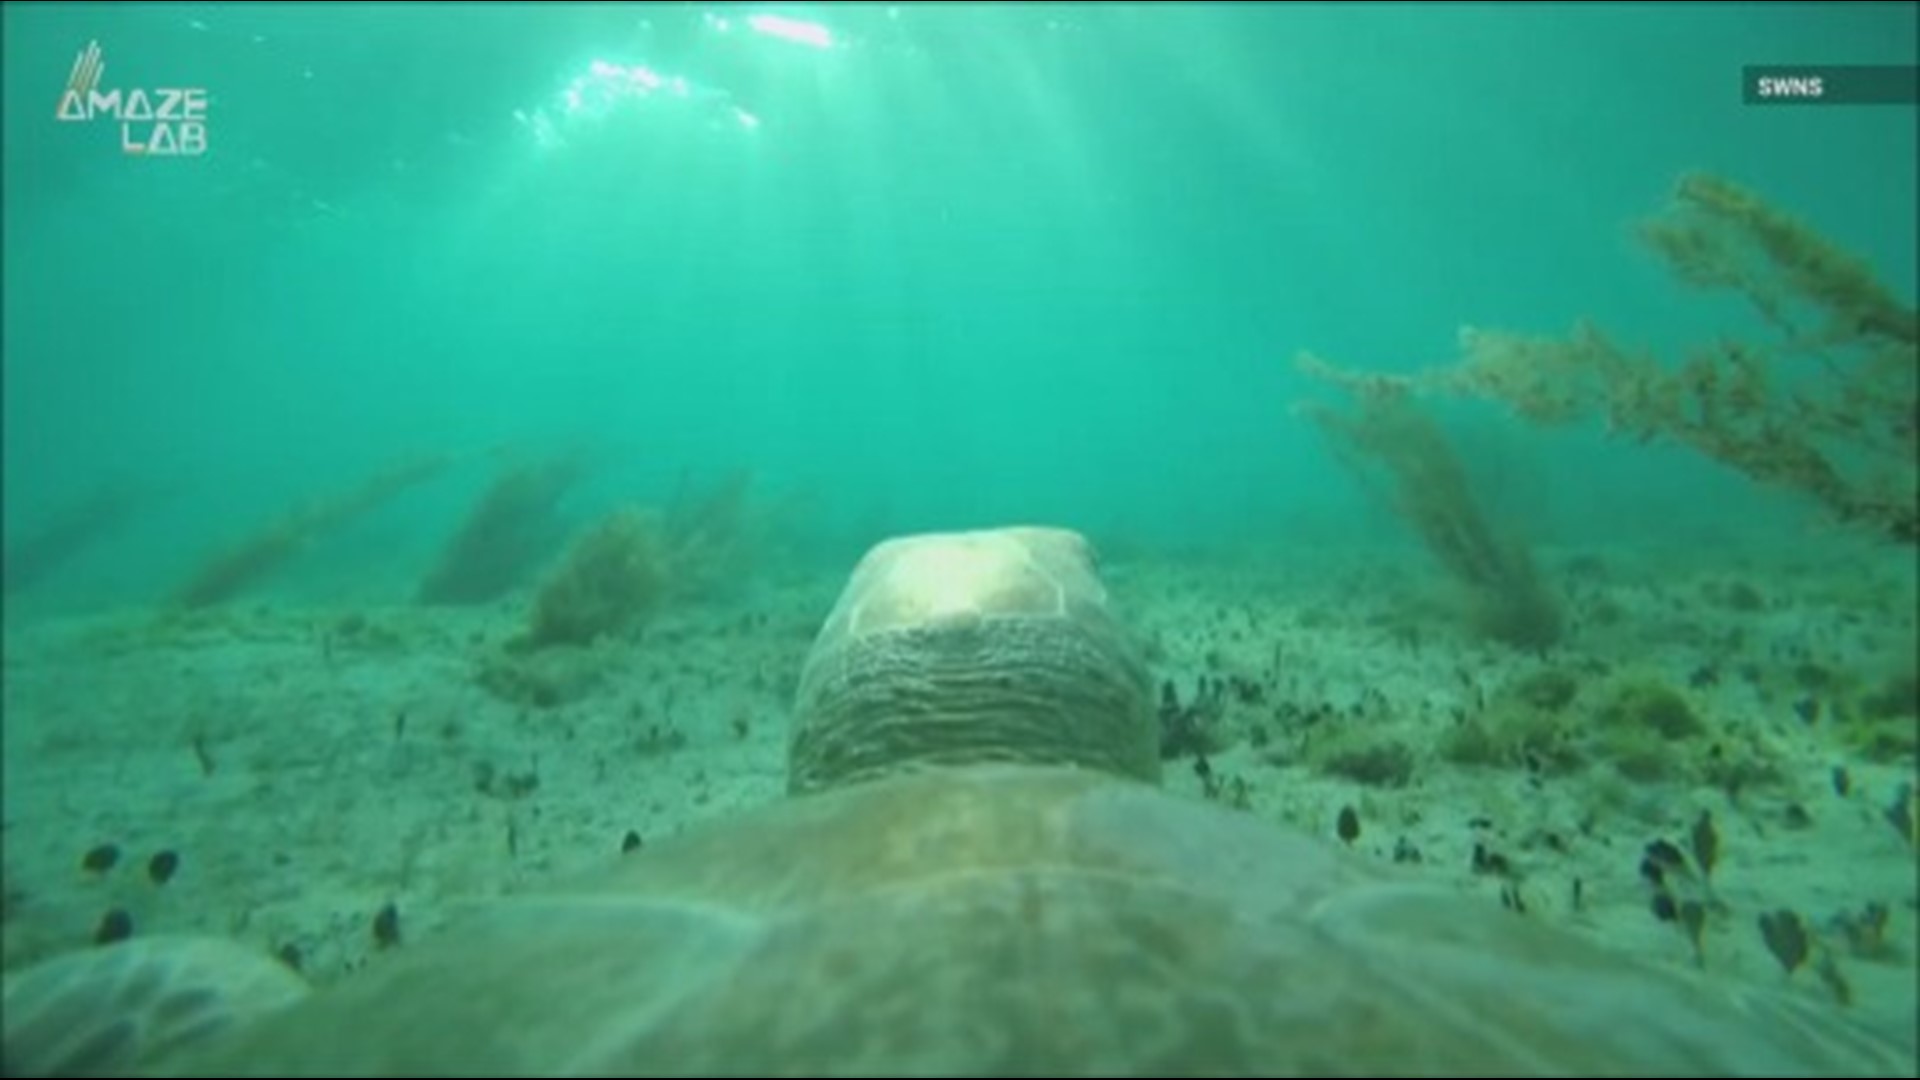 The Oceanogràfic Foundation deployed cameras on sea turtles during their TurtleCam project and got a truly unique view.